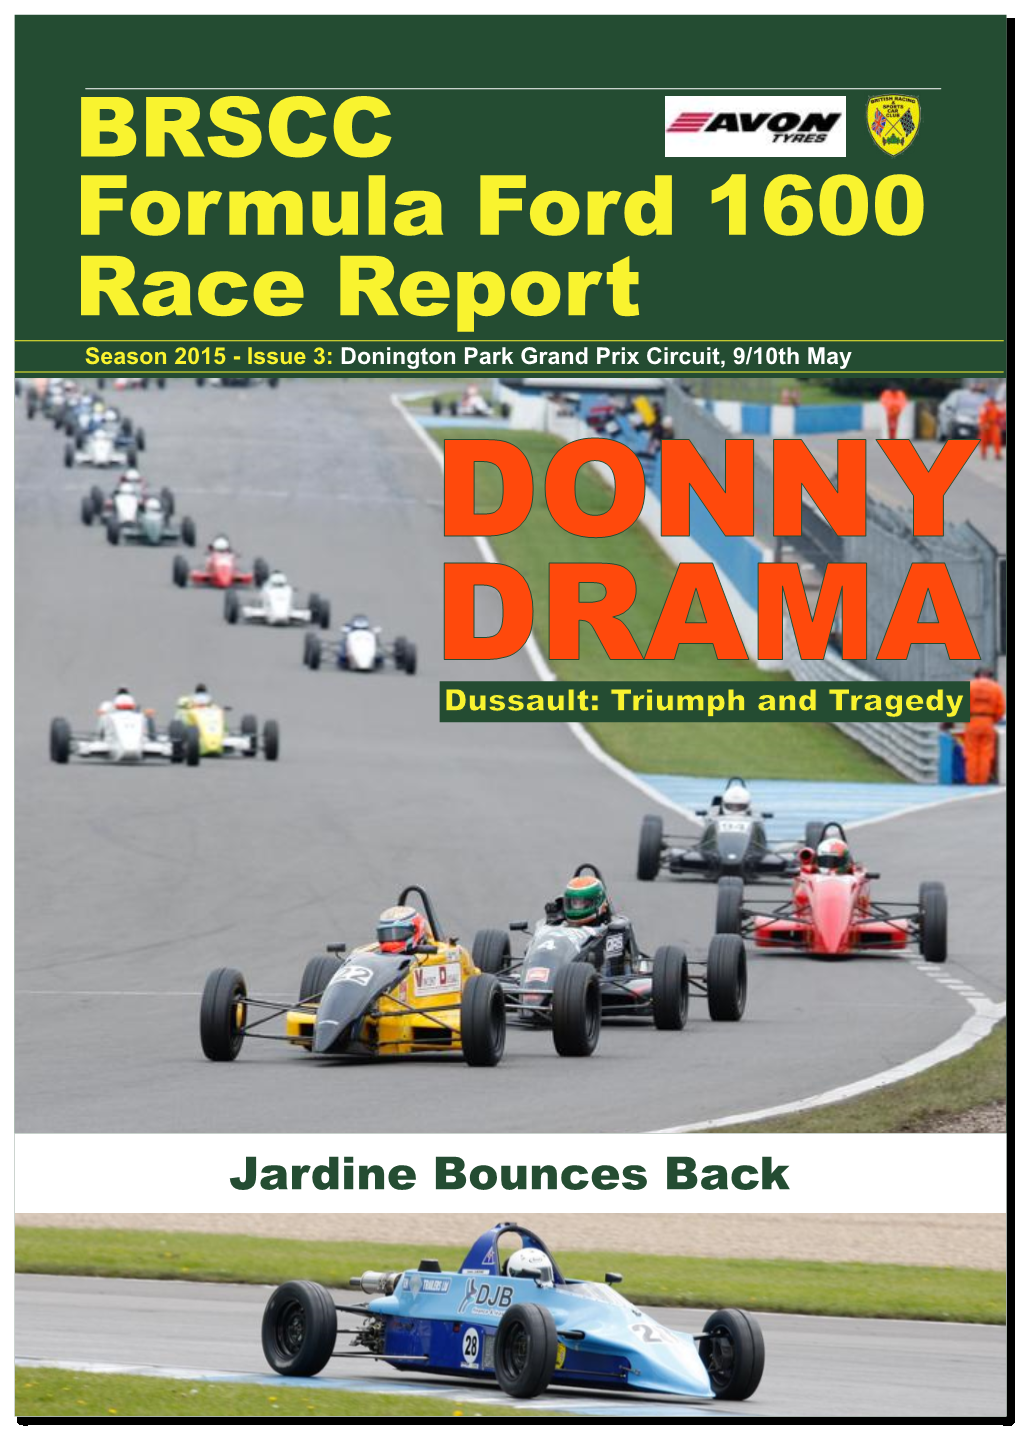 BRSCC Formula Ford 1600 Race Report Season 2015 - Issue 3: Donington Park Grand Prix Circuit, 9/10Th May DONNY DRAMA Dussault: Triumph and Tragedy